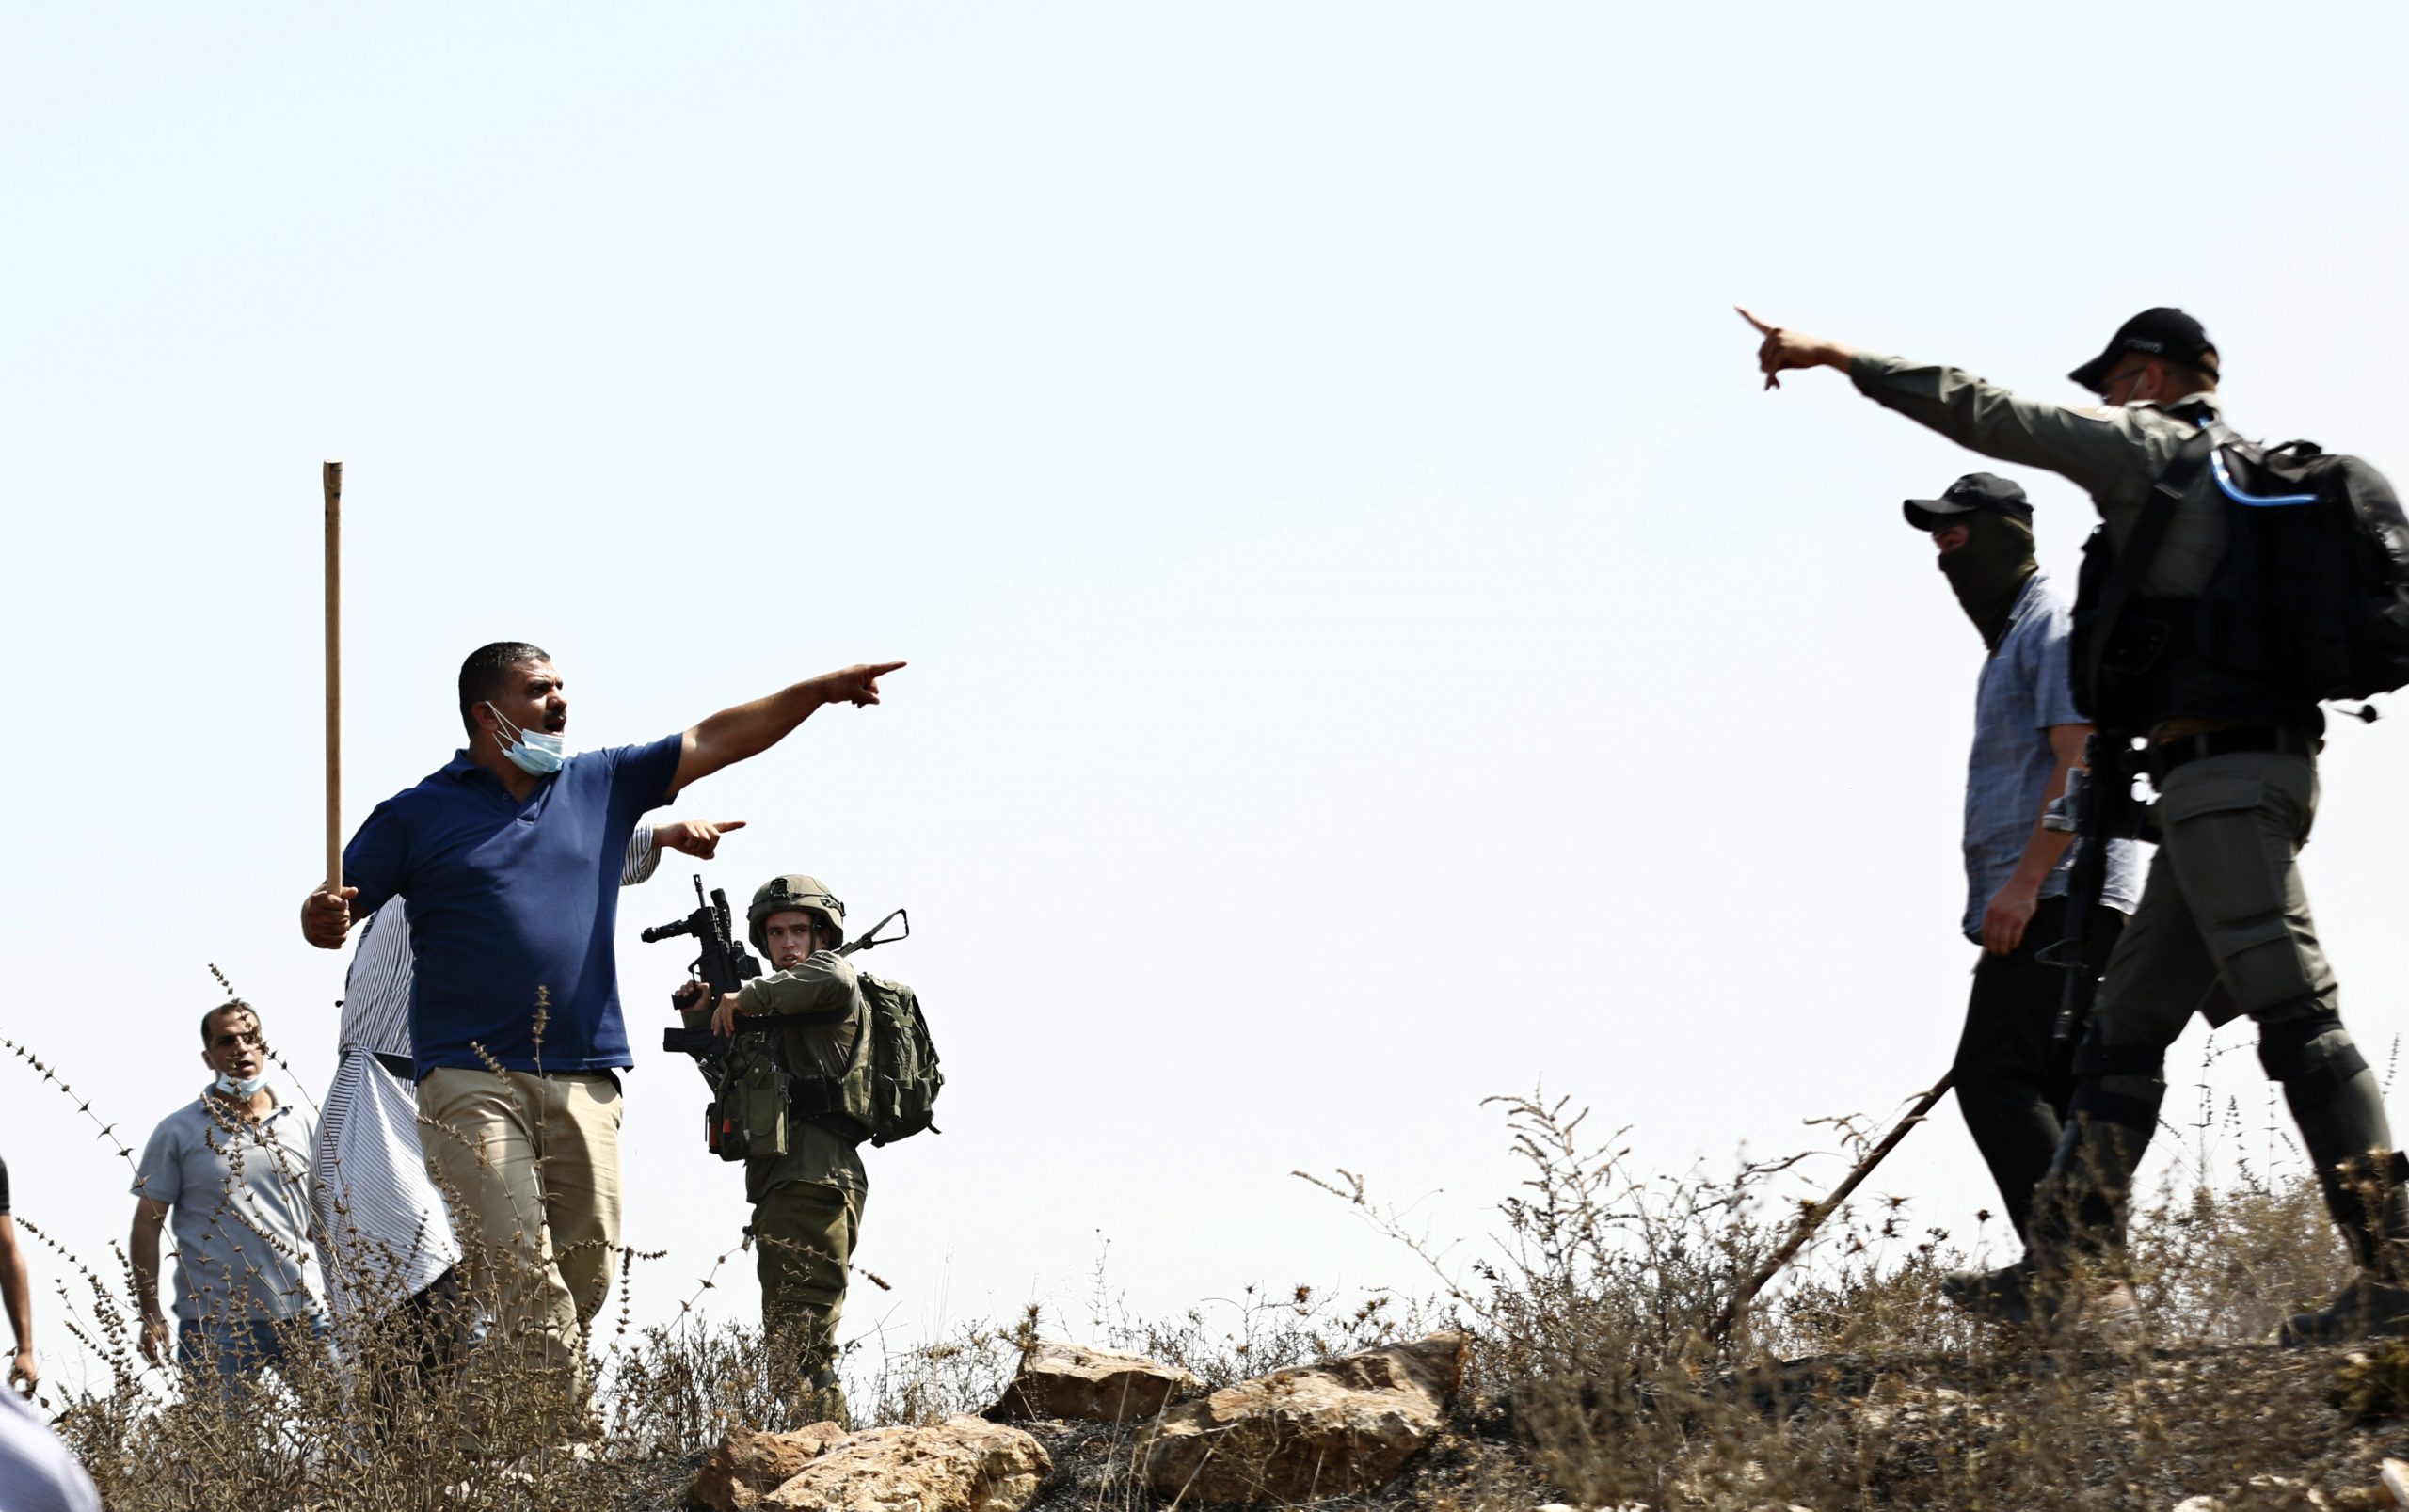 Palestinian farmers kick out Israeli settlers who trespassed on their lands and destroyed crops